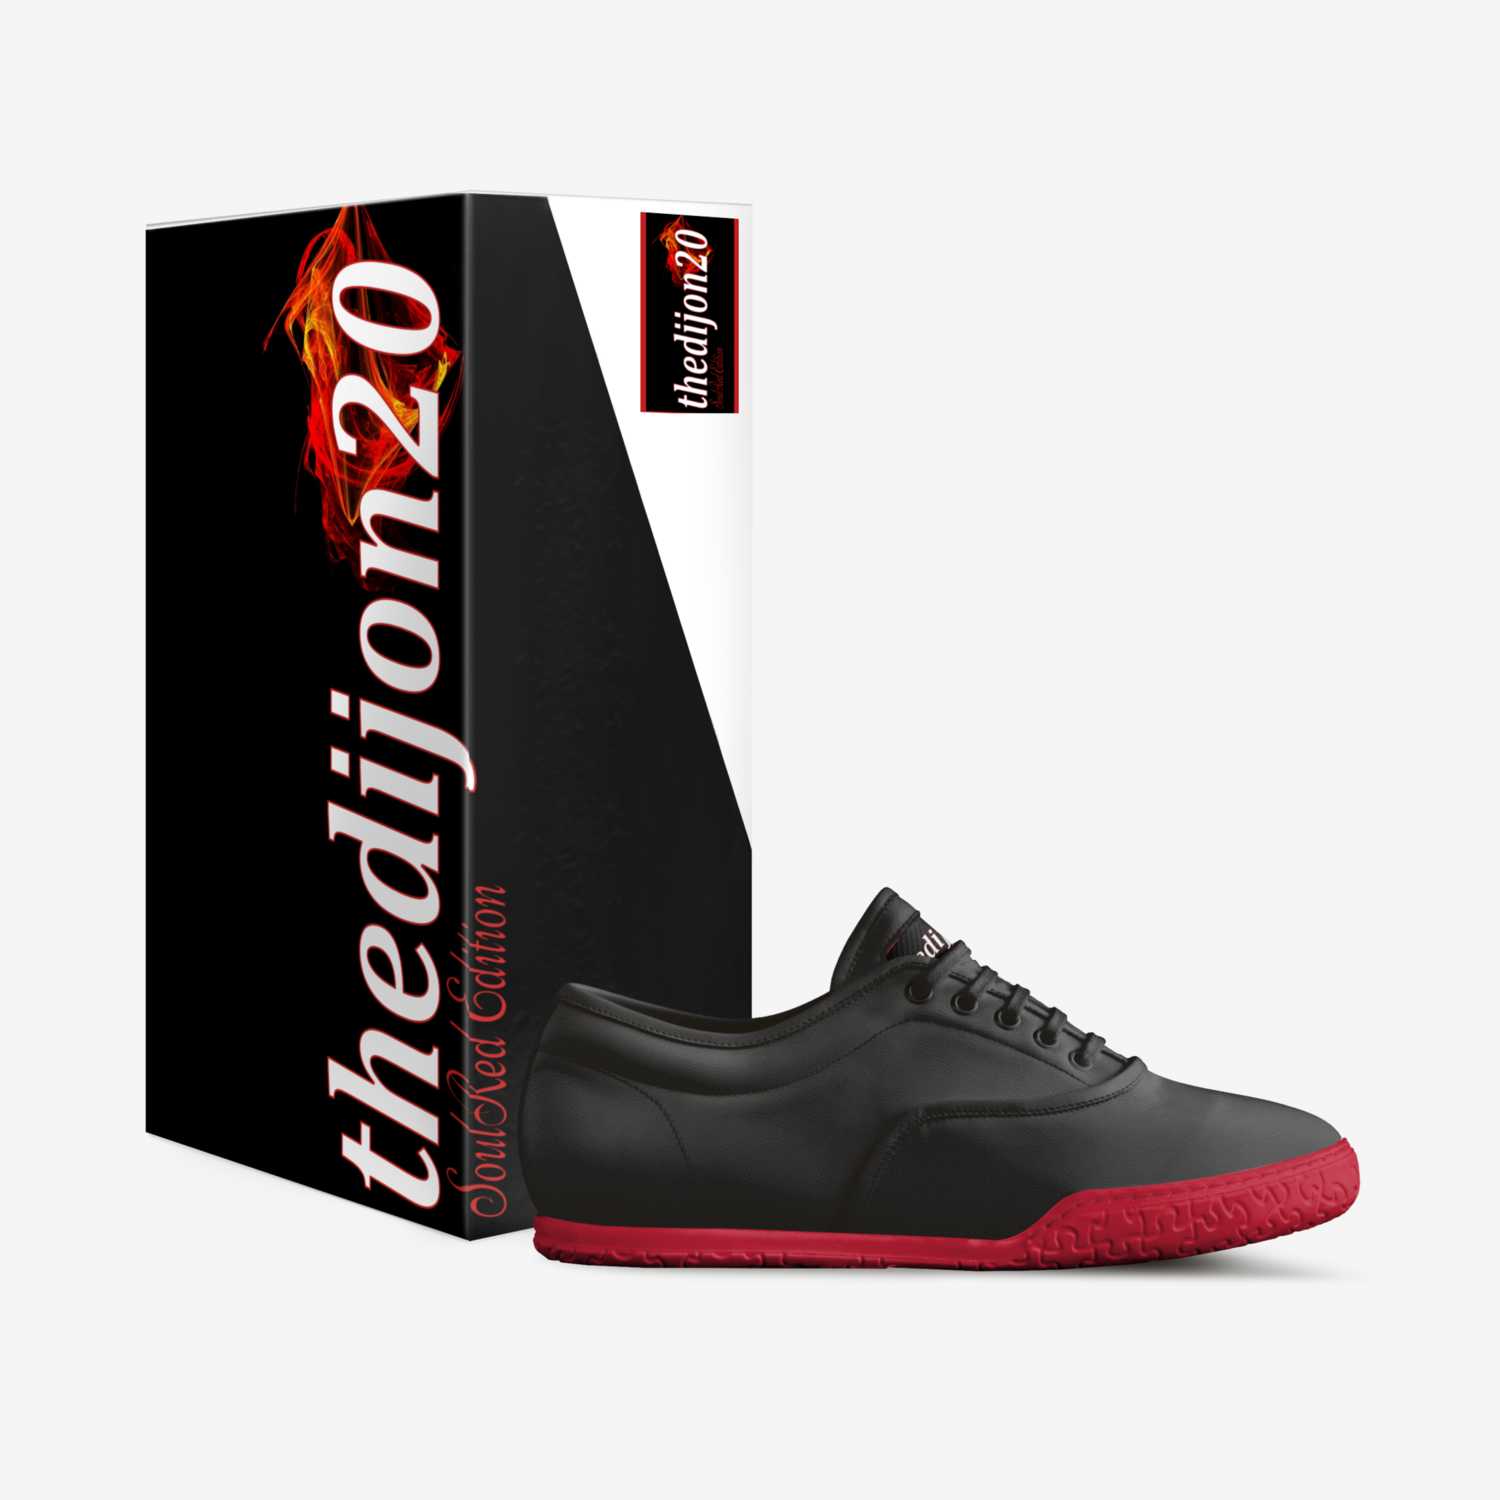 TheDijon20 Two custom made in Italy shoes by Keenan Dijon | Box view